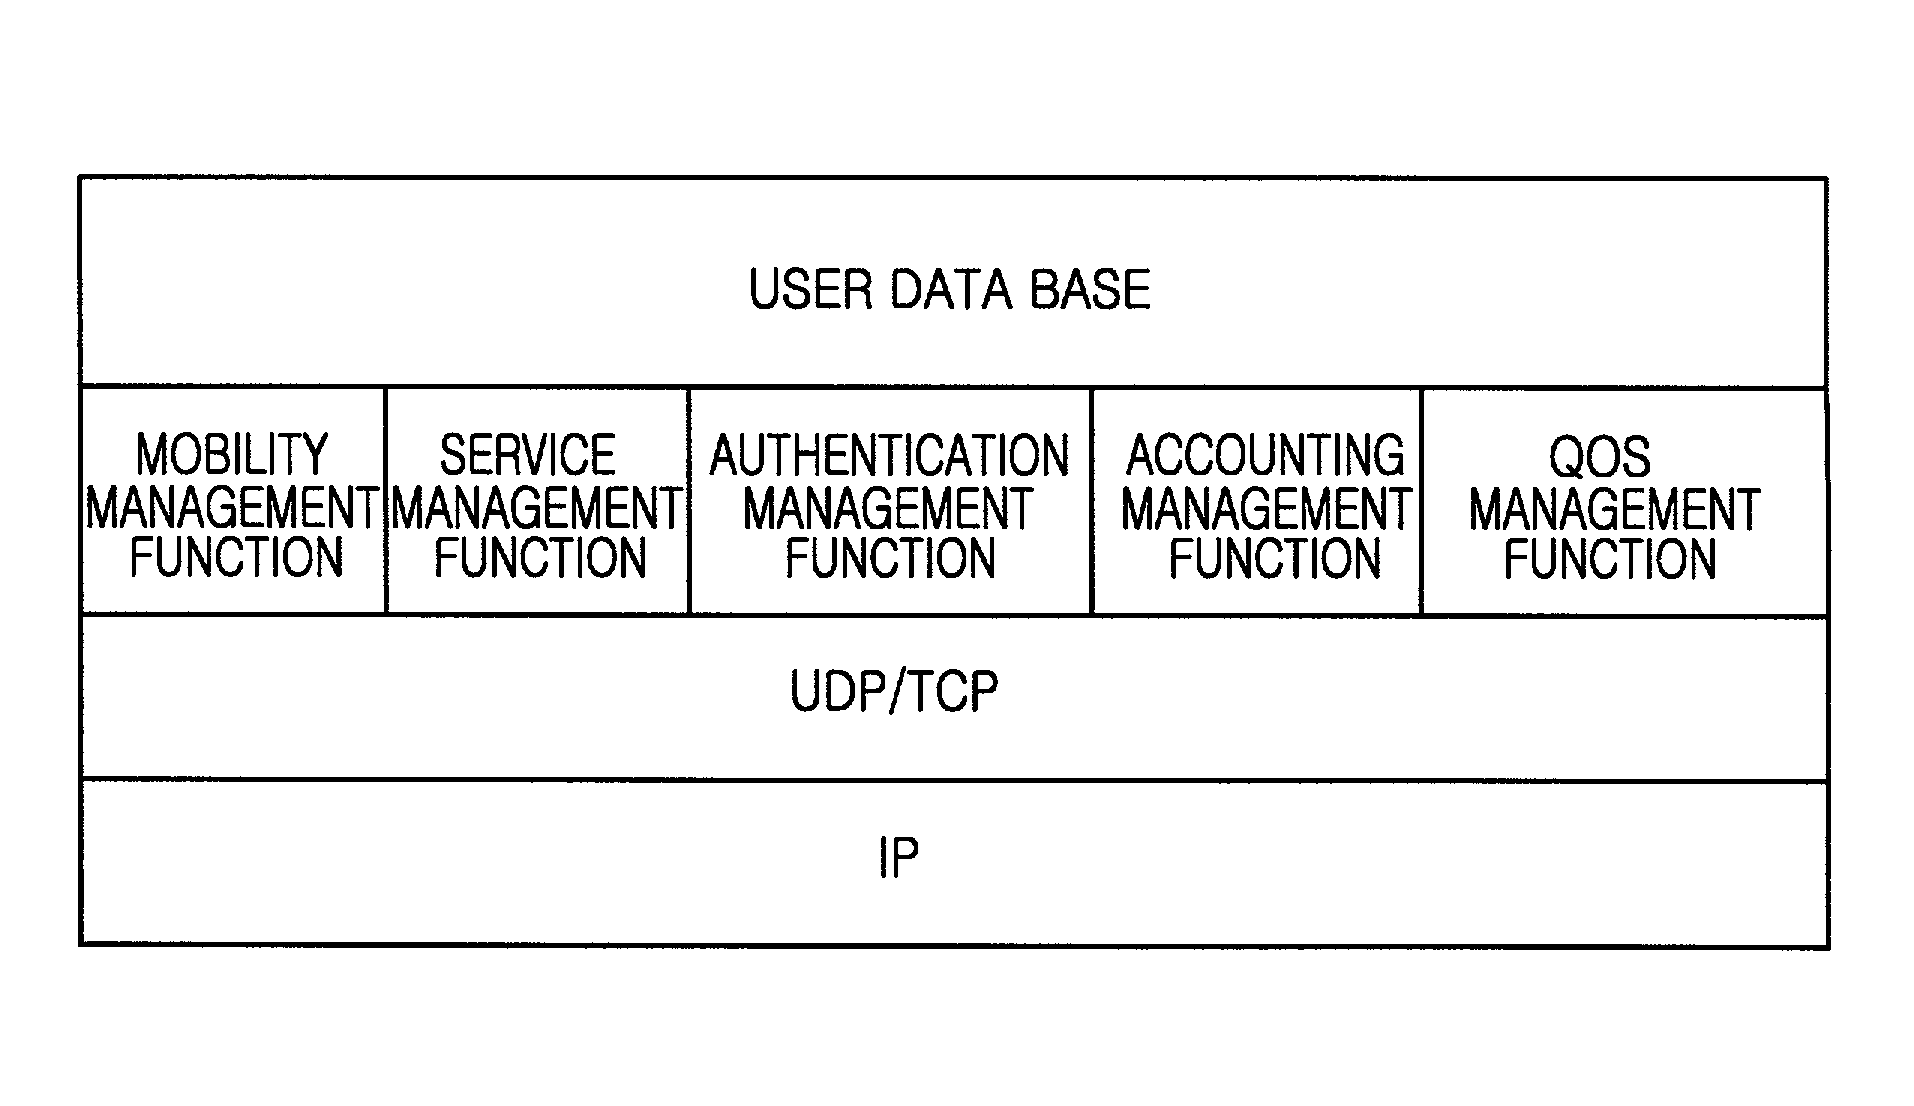 Common subscriber managing apparatus and method based on functional modeling of a common subscriber server for use in an ALL-IP network and method therefor